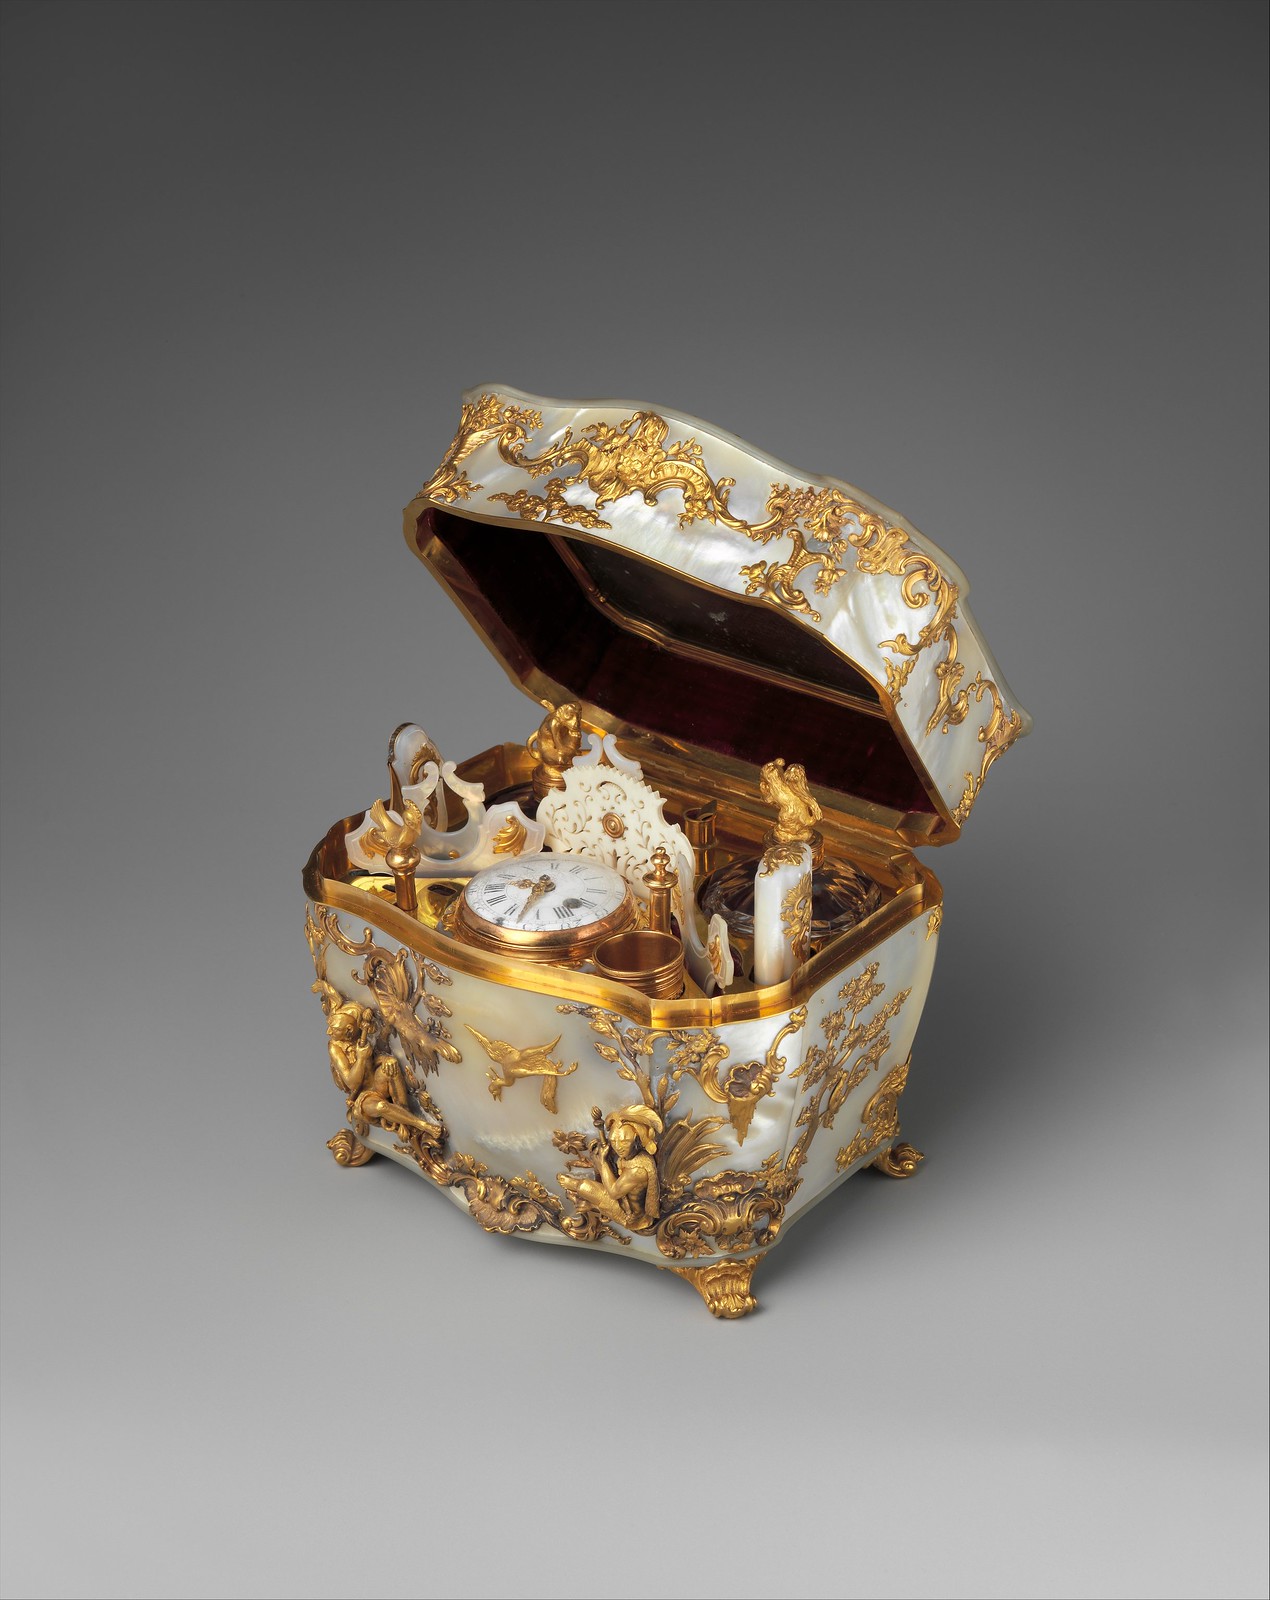 1745 Nécessaire with watch. German. Gold and mother-of-pearl, lined with dark-red velvet. metmuseum